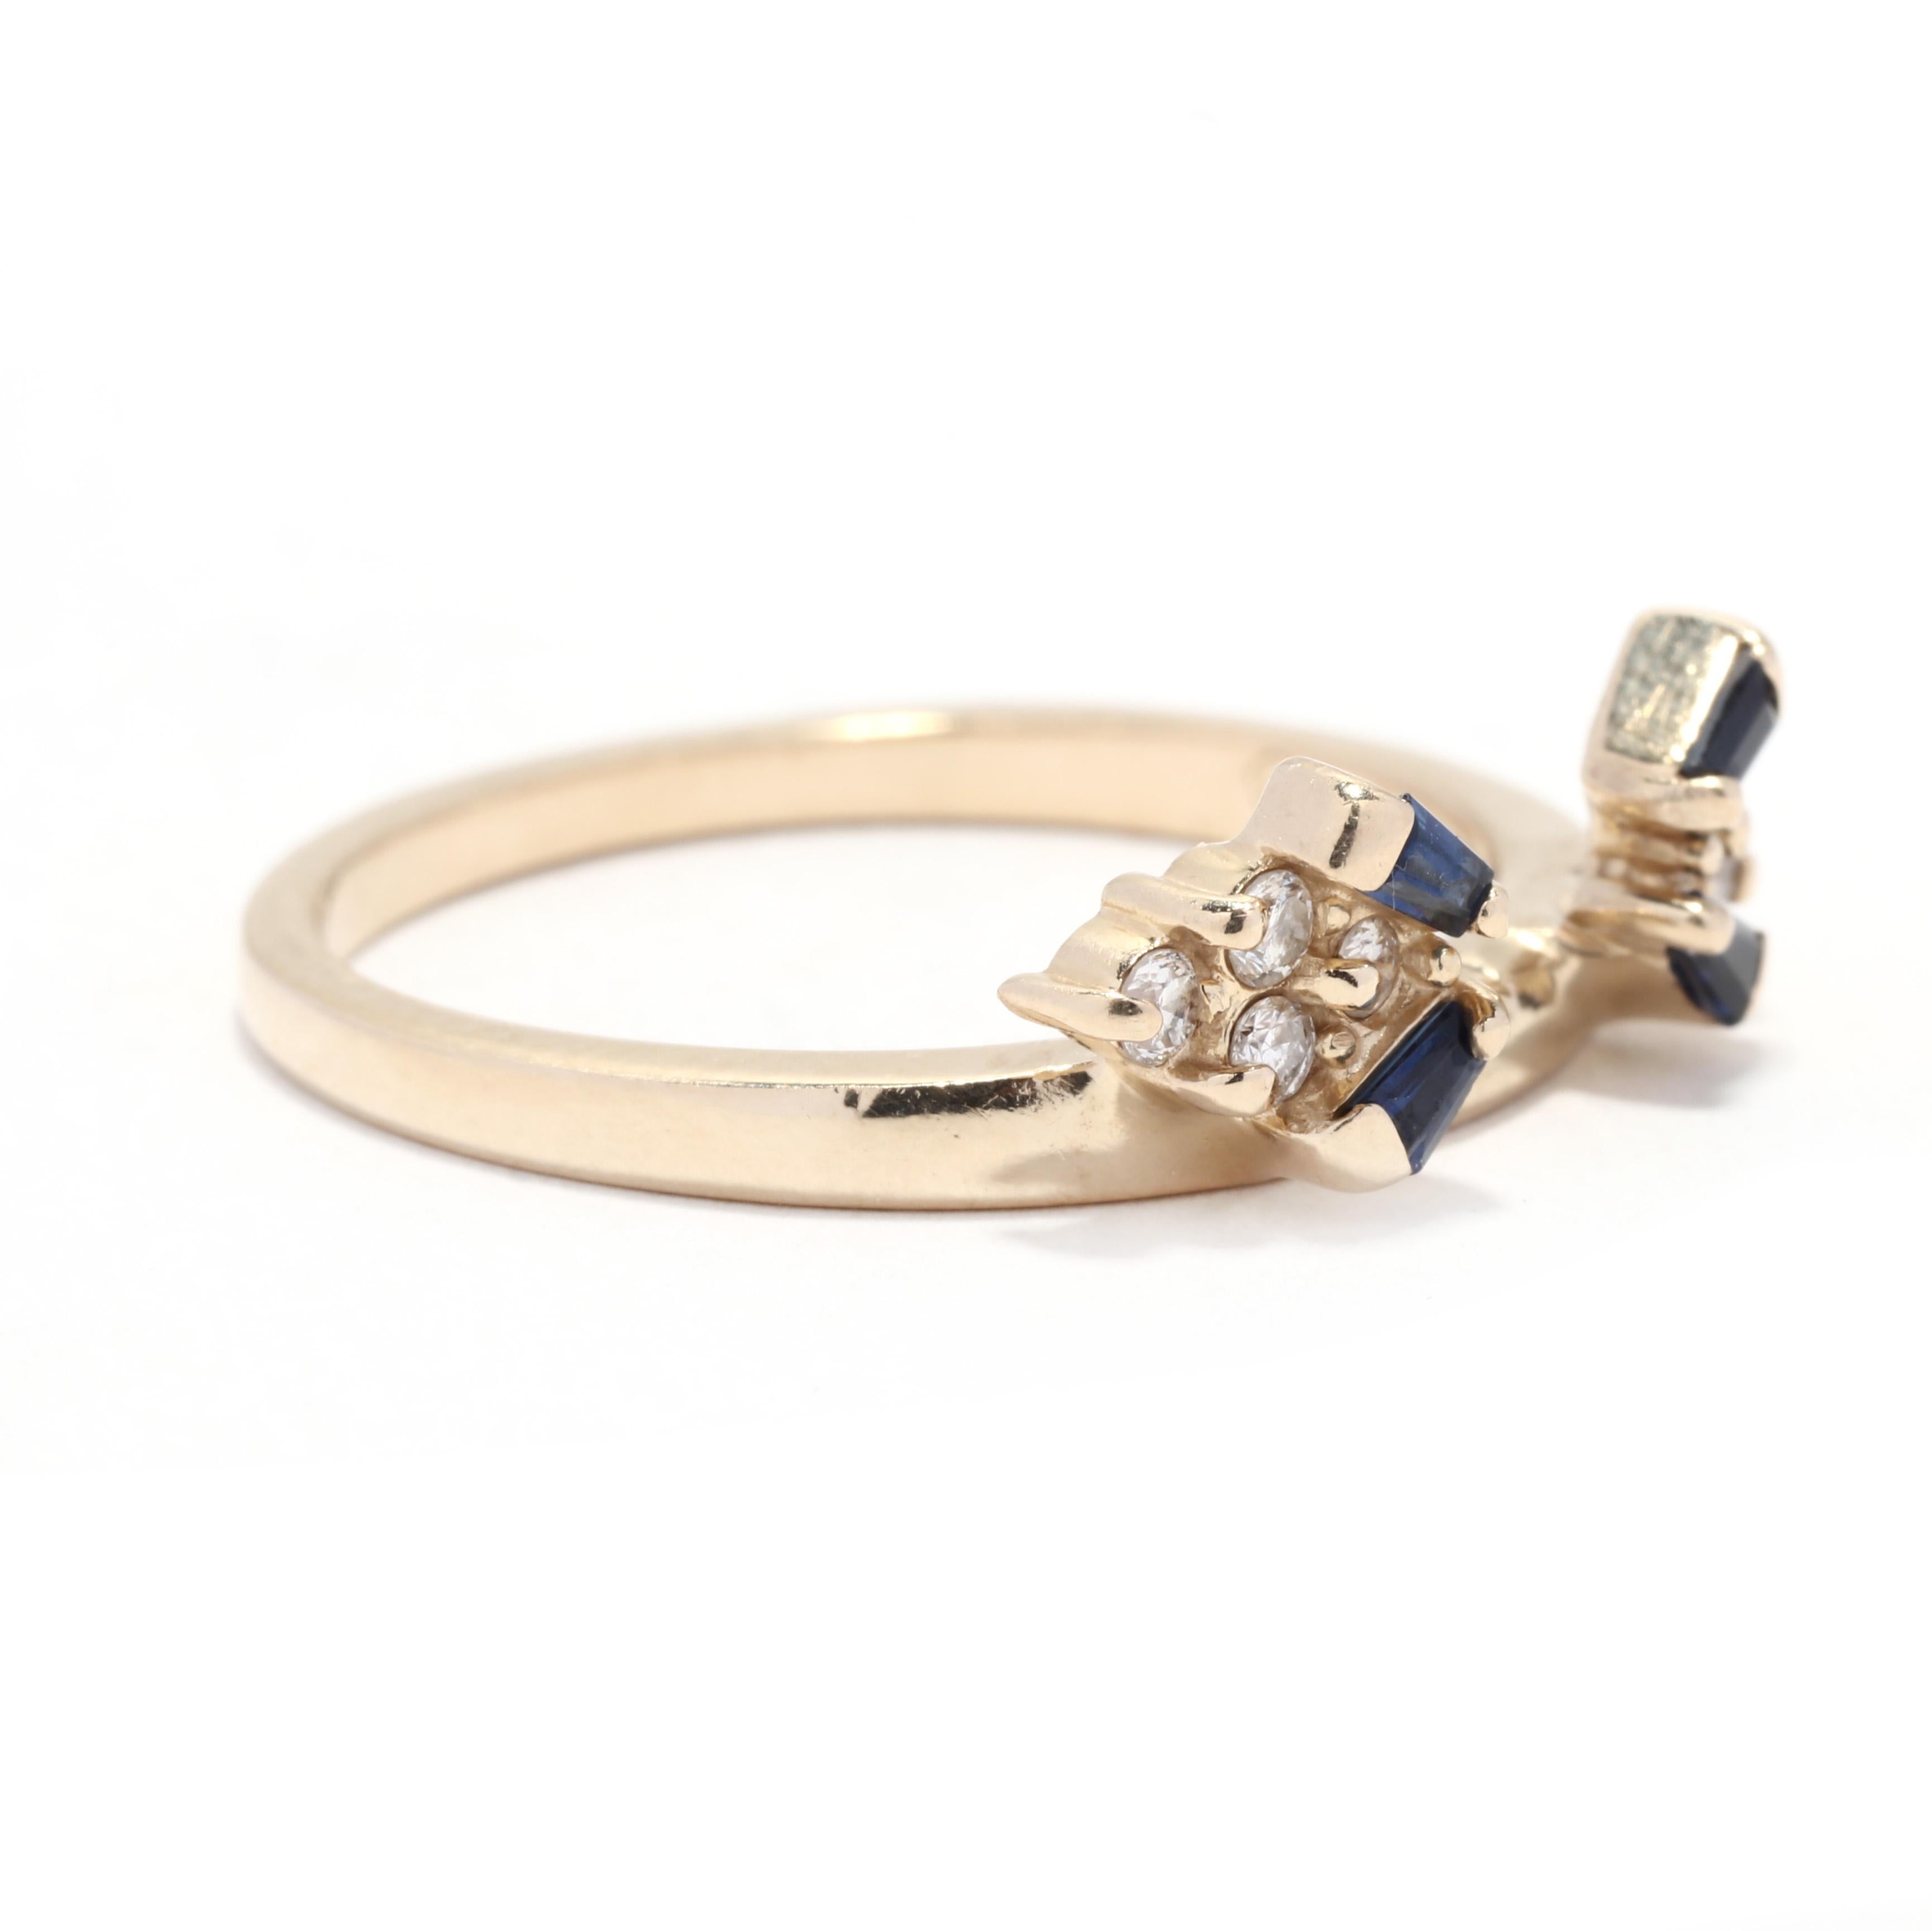 A vintage 14 karat yellow gold diamond and sapphire wedding wrap ring. This stackable ring jacket features a space in the center with two tapered baguette sapphires on either side weighing approximately .16 total carats and with a cluster of round